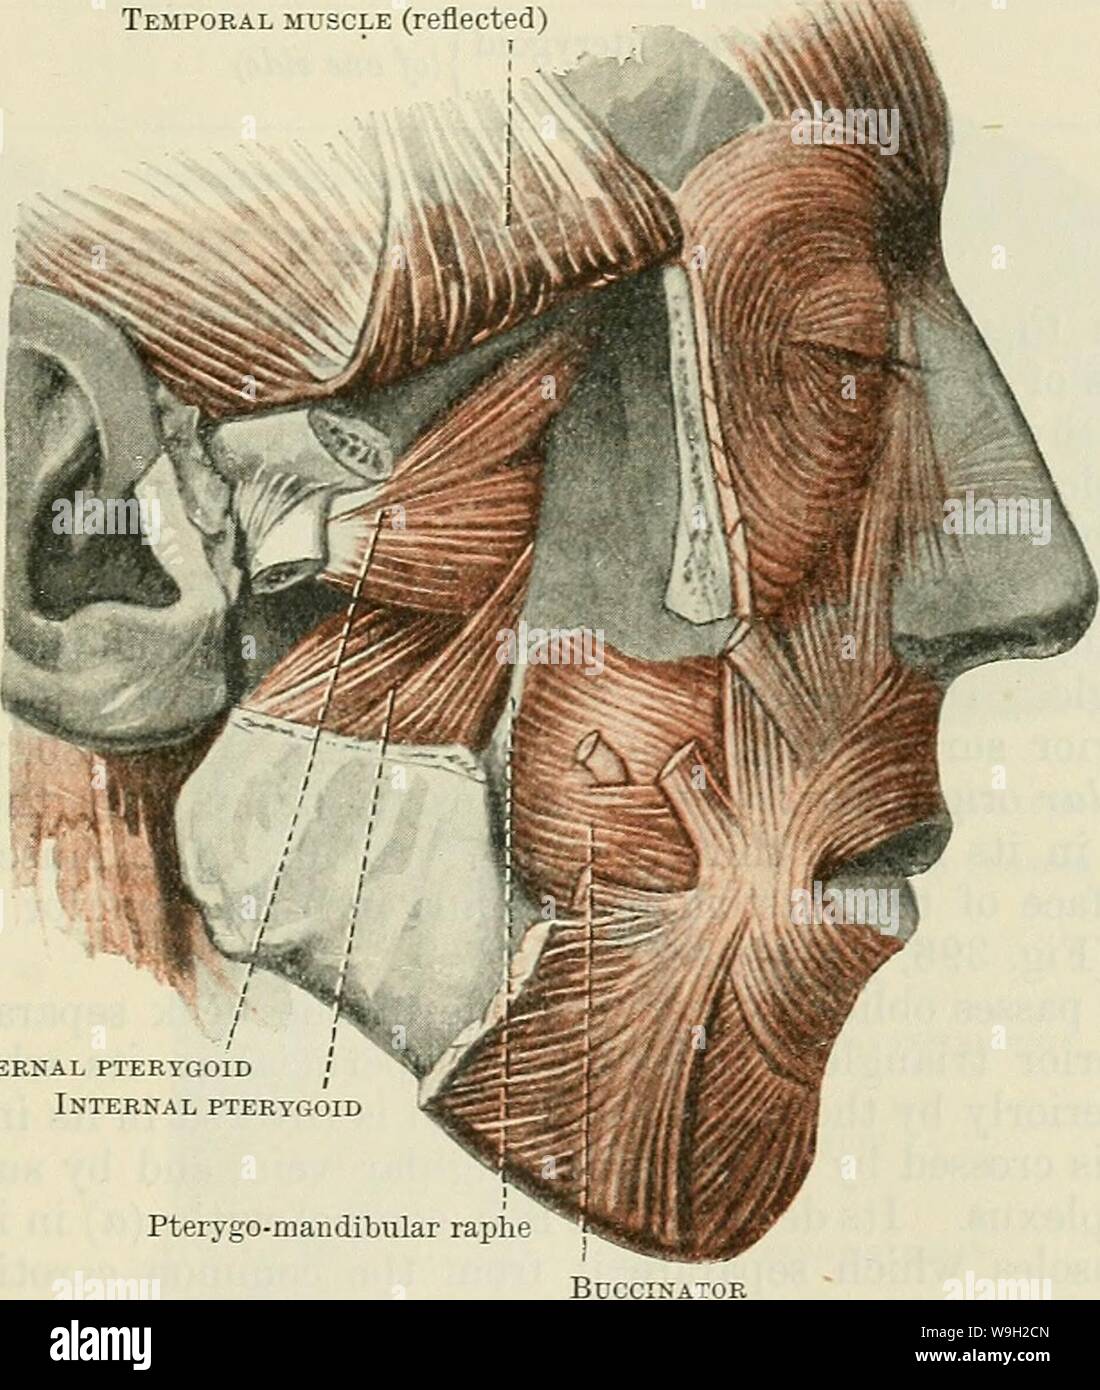 Archive image from page 490 of Cunningham's Text-book of anatomy (1914). Cunningham's Text-book of anatomy  cunninghamstextb00cunn Year: 1914 ( MUSCLES OF MASTICATION. 457 fovea pterygoidea on the anterior aspect of the neck of the mandible (Figs. 403 and 404, p. 455), and (2) the articular disc and capsule of the mandibular articulation. This muscle is covered by the insertion of the temporal muscle and the coronoid process of the mandible, and is usually crossed by the internal maxillary artery. It conceals the mandibular branch of the trigeminal nerve, and the pterygoid origin of the intern Stock Photo